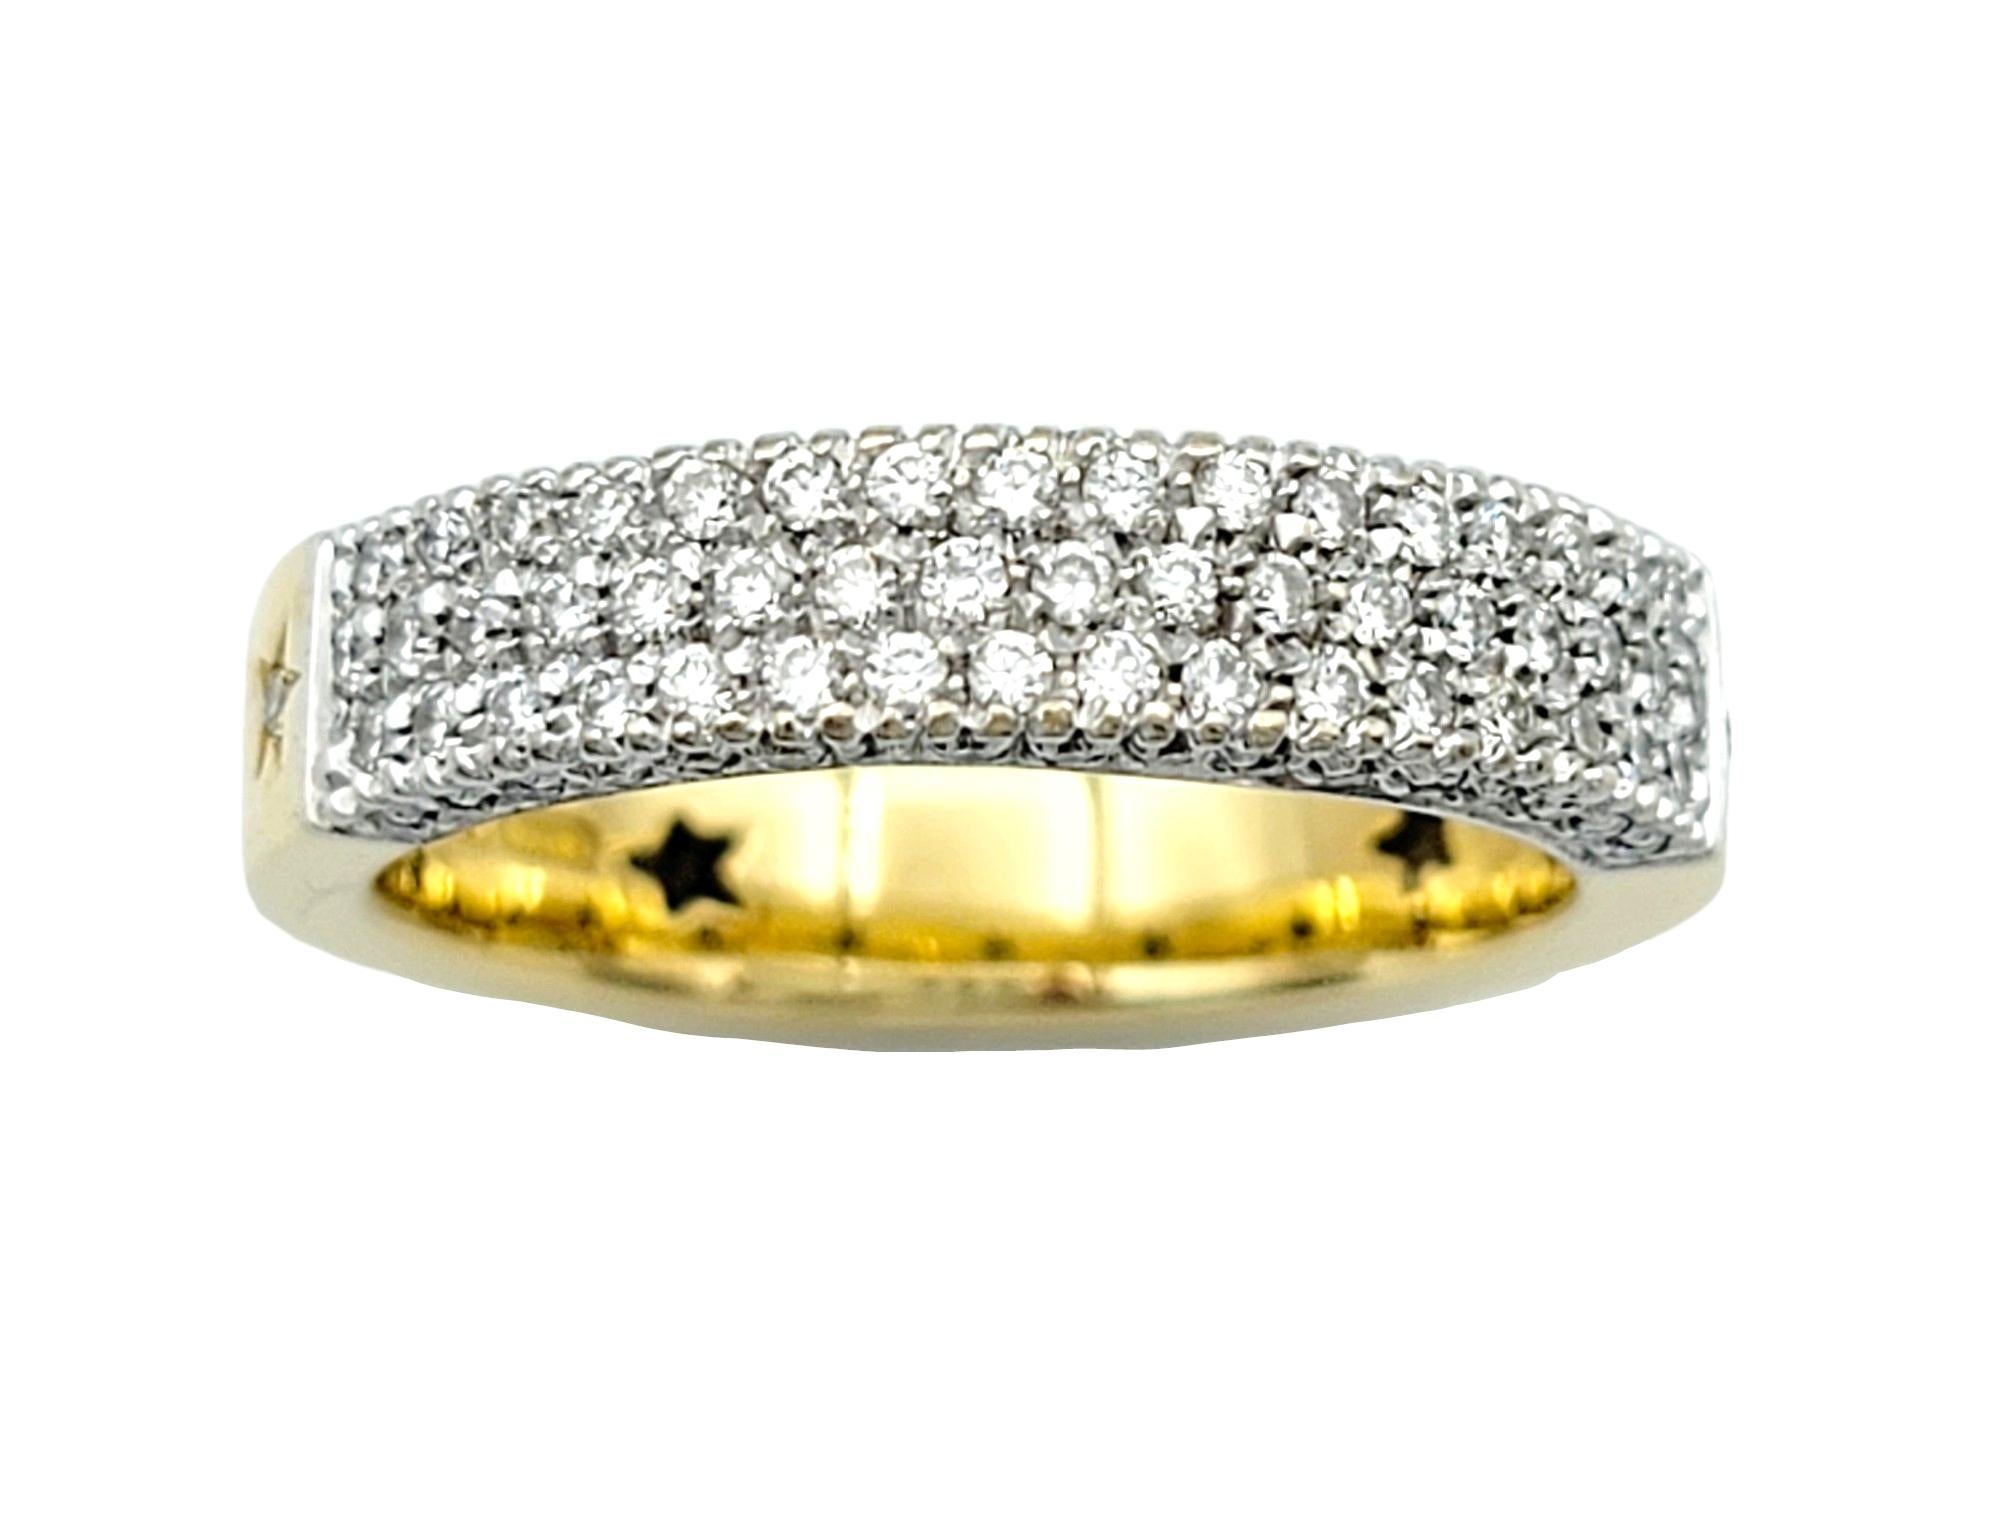 Ring Size: 6.75

This beautiful H. Stern diamond band ring set in 18 karat yellow gold is a stunning piece that exudes elegance and sophistication. Featuring three rows of dazzling diamonds along the top of the band, this ring catches the light from